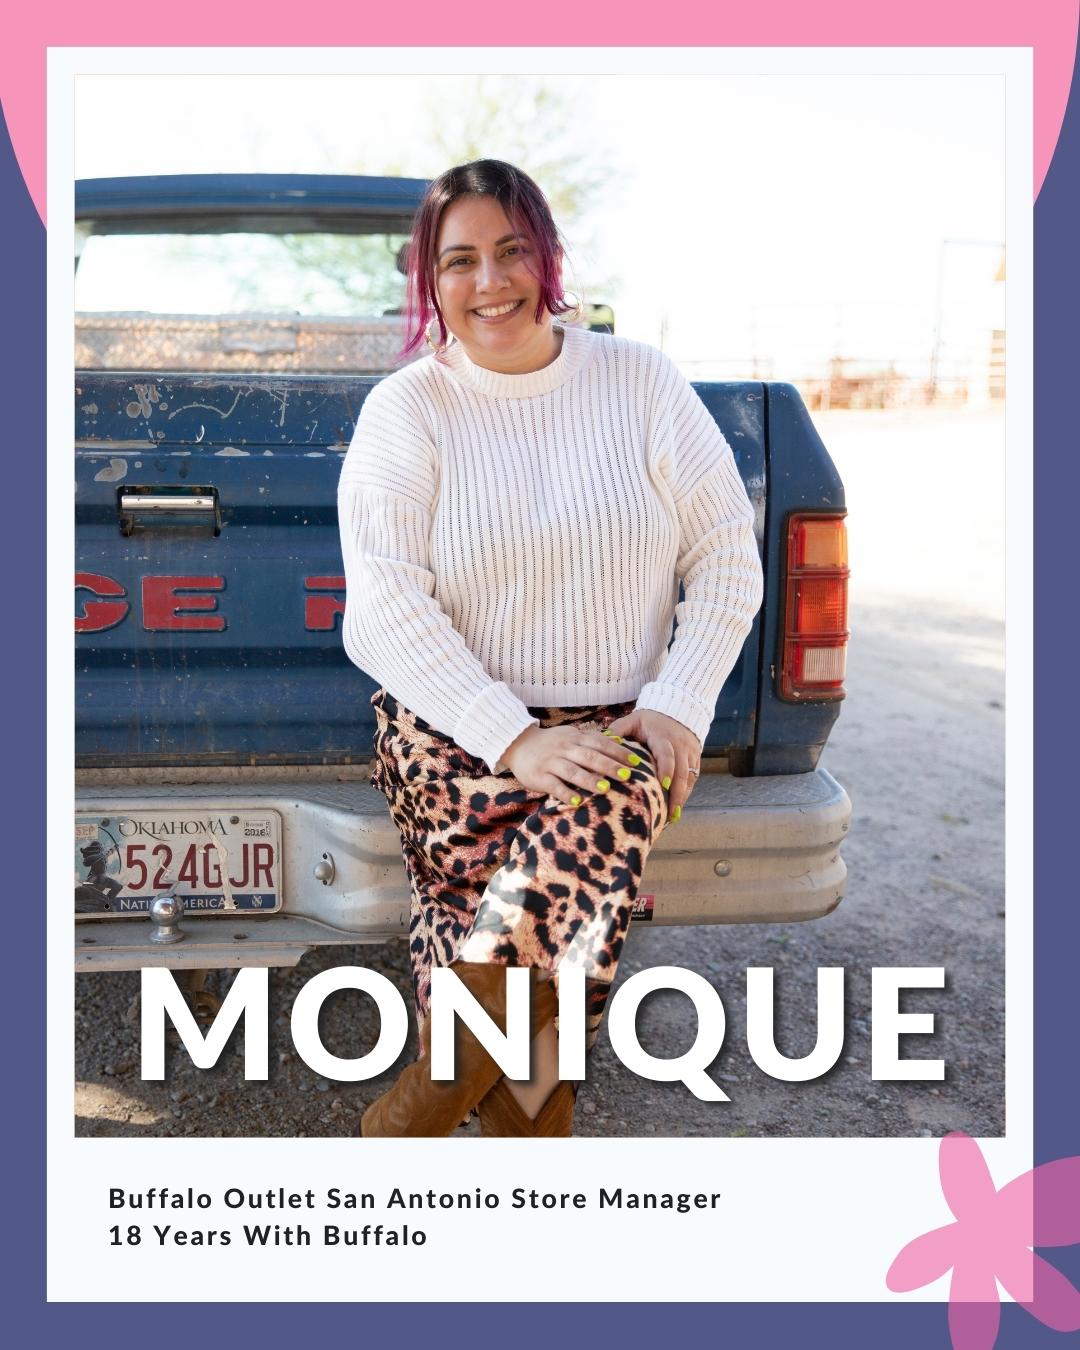 Monique sitting on blue truck; reads Buffalo Outlet San Antonio Store Manager, 18 Years With Buffalo Exchange